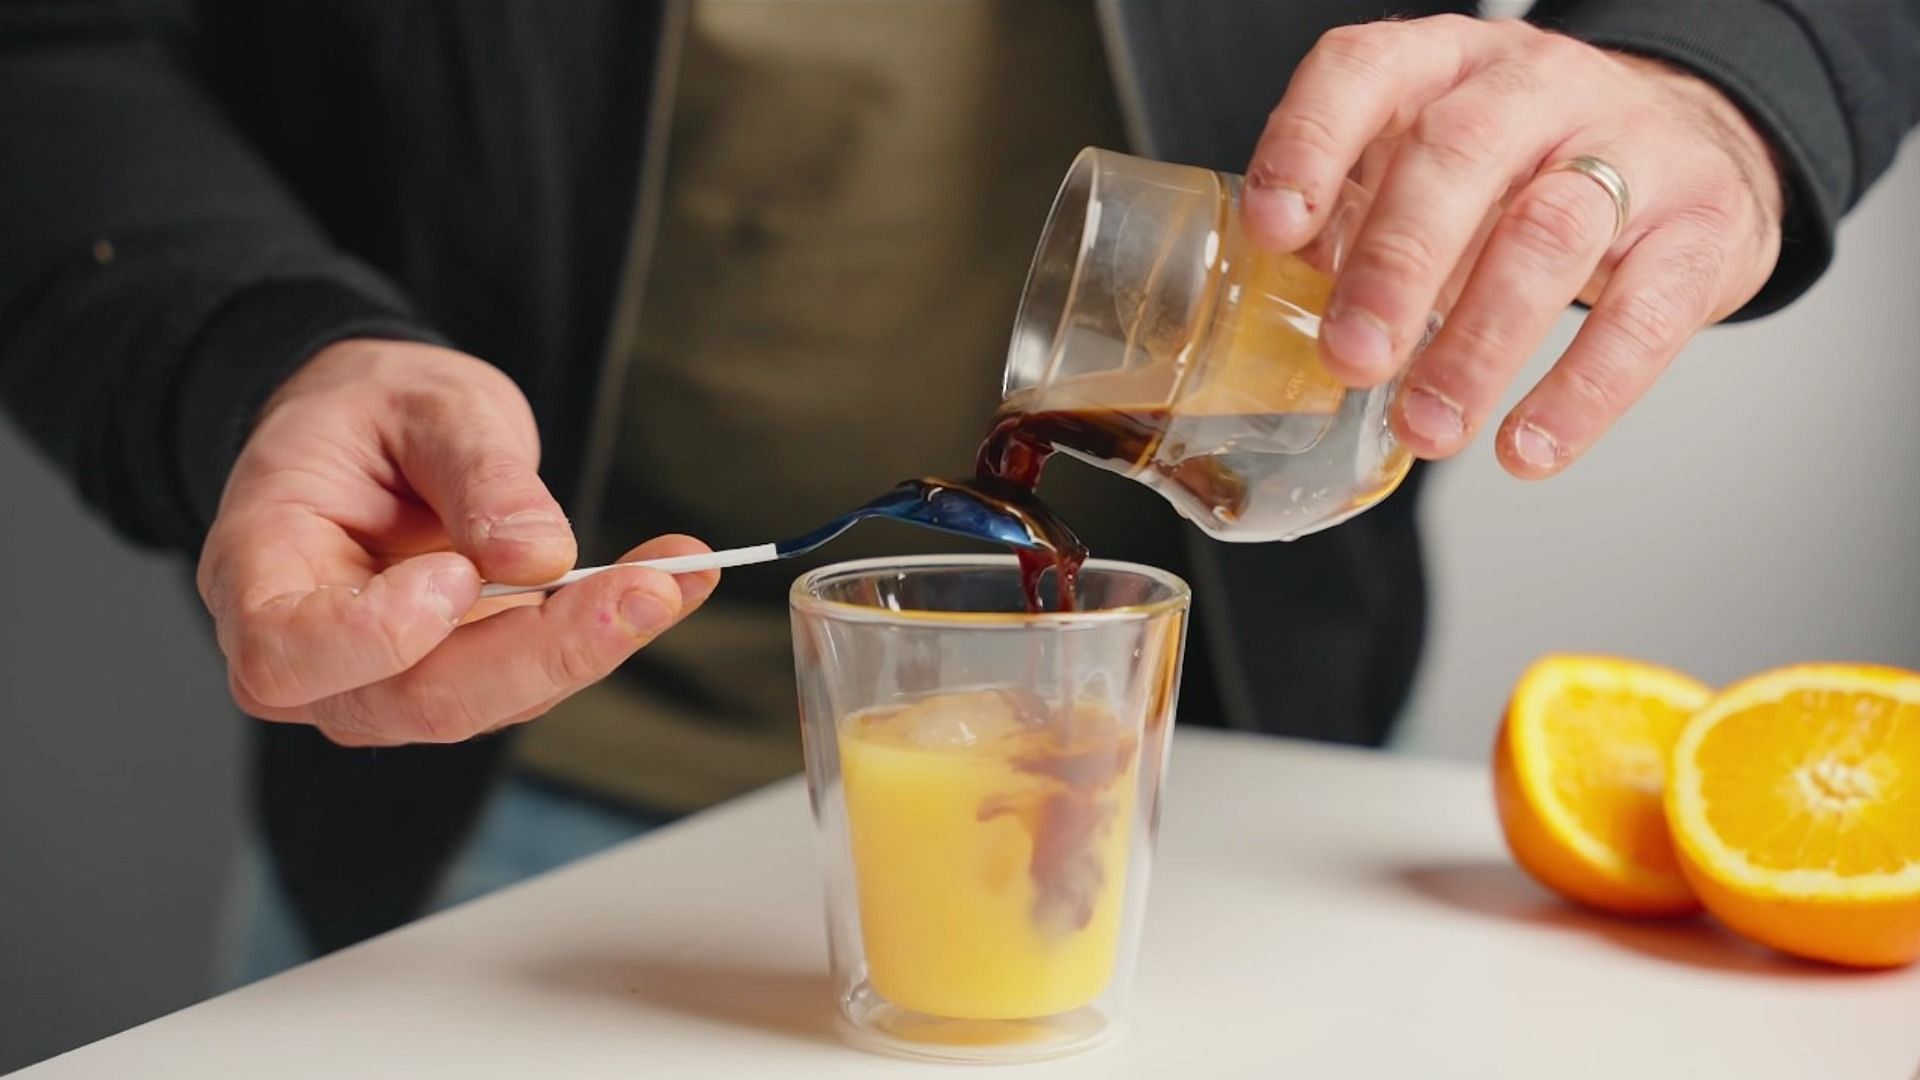 Pour the cold brew concentrate over a spoon instead of directly into the juice (Image via Kyle Rowsell/YouTube)